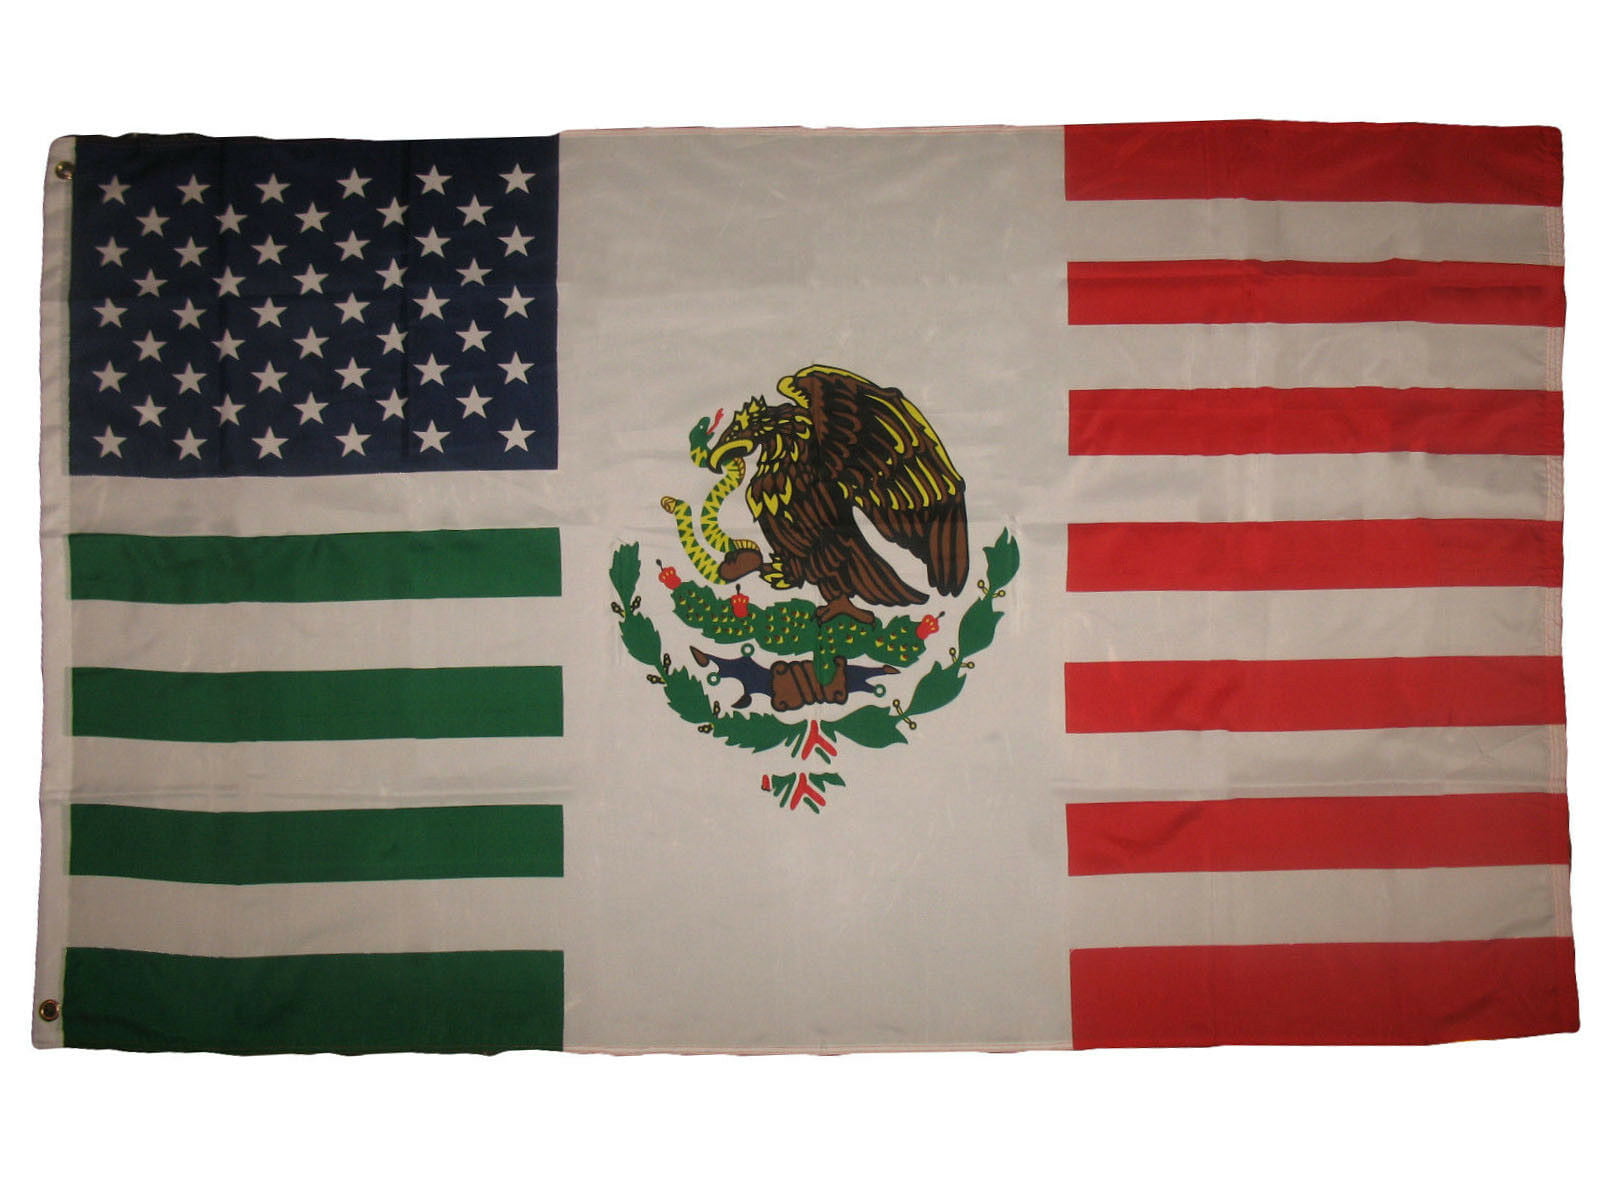 USA Mexico Friendship American Mexican Combination 3x5 Banner Flag Banner